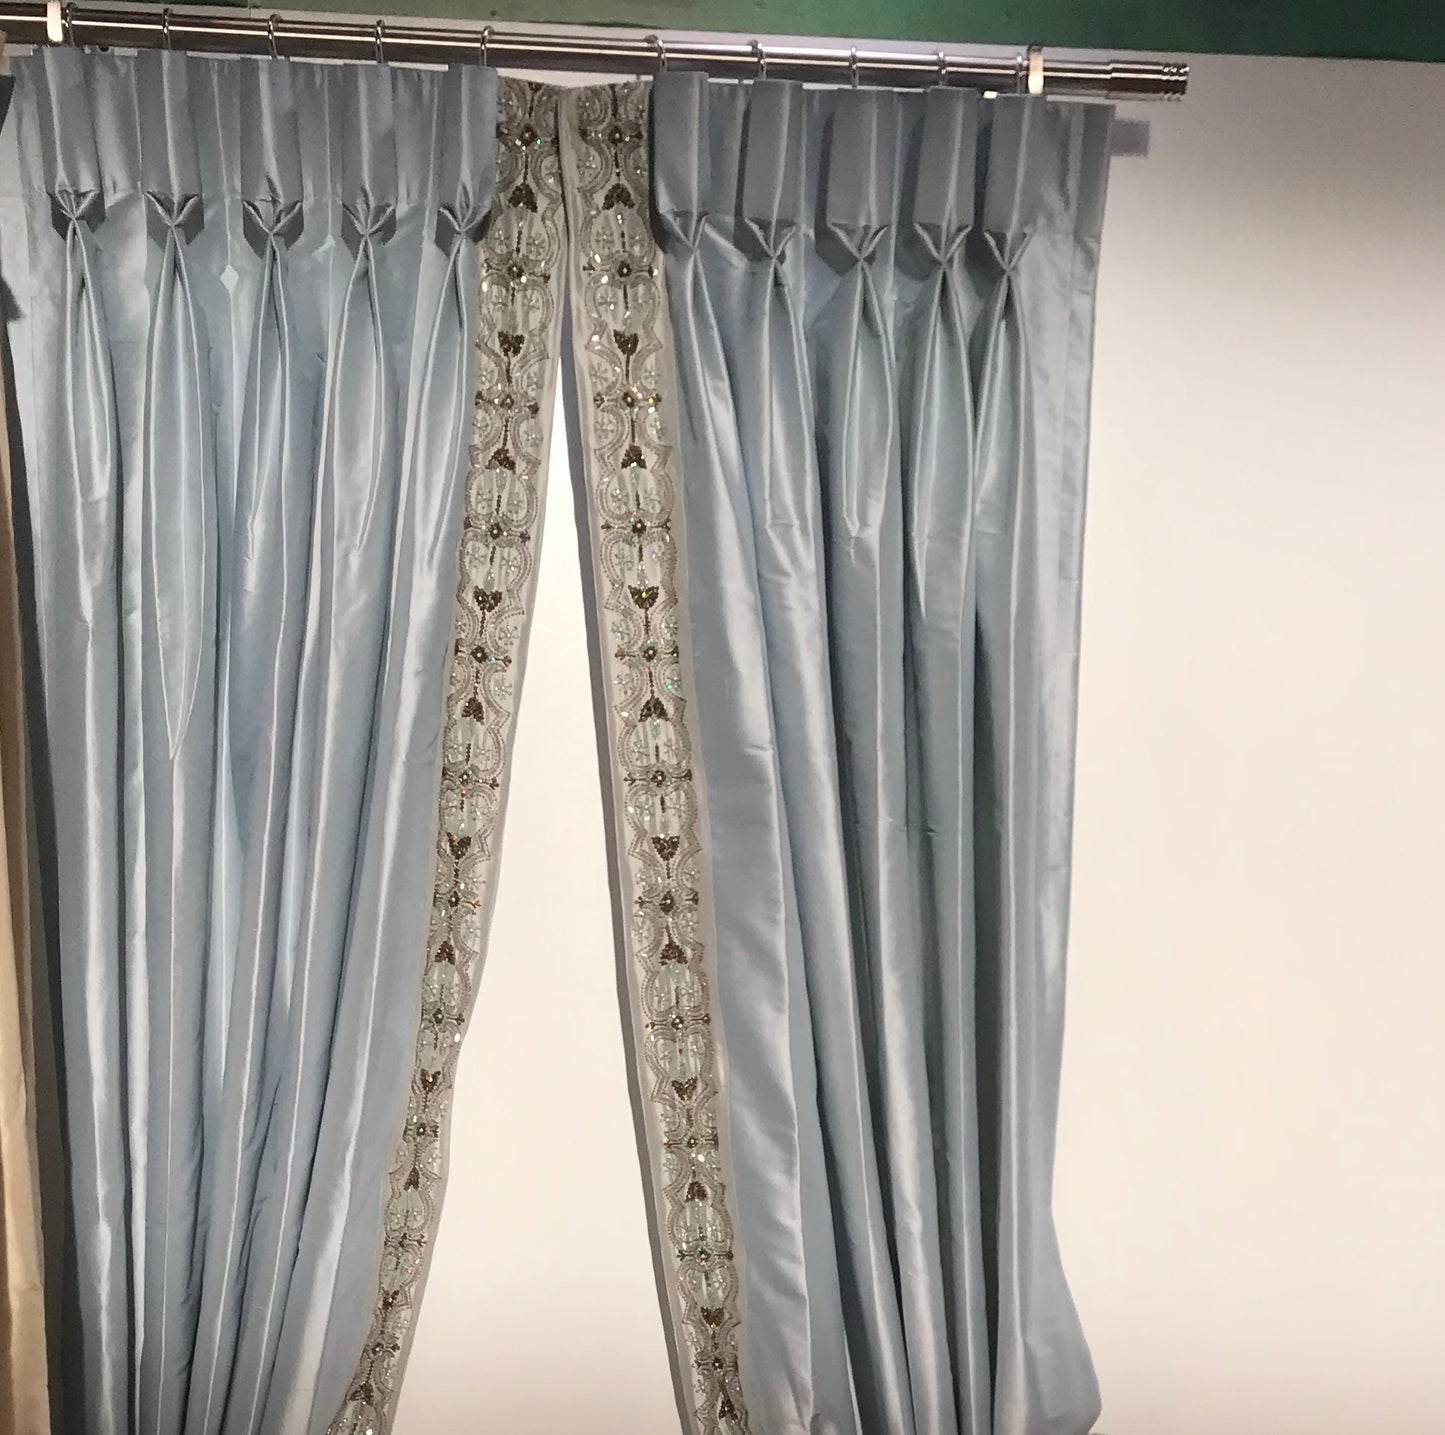 Silk Dupioni Solid Hand Embroidered Trim Drapes Curtains Ice Blue